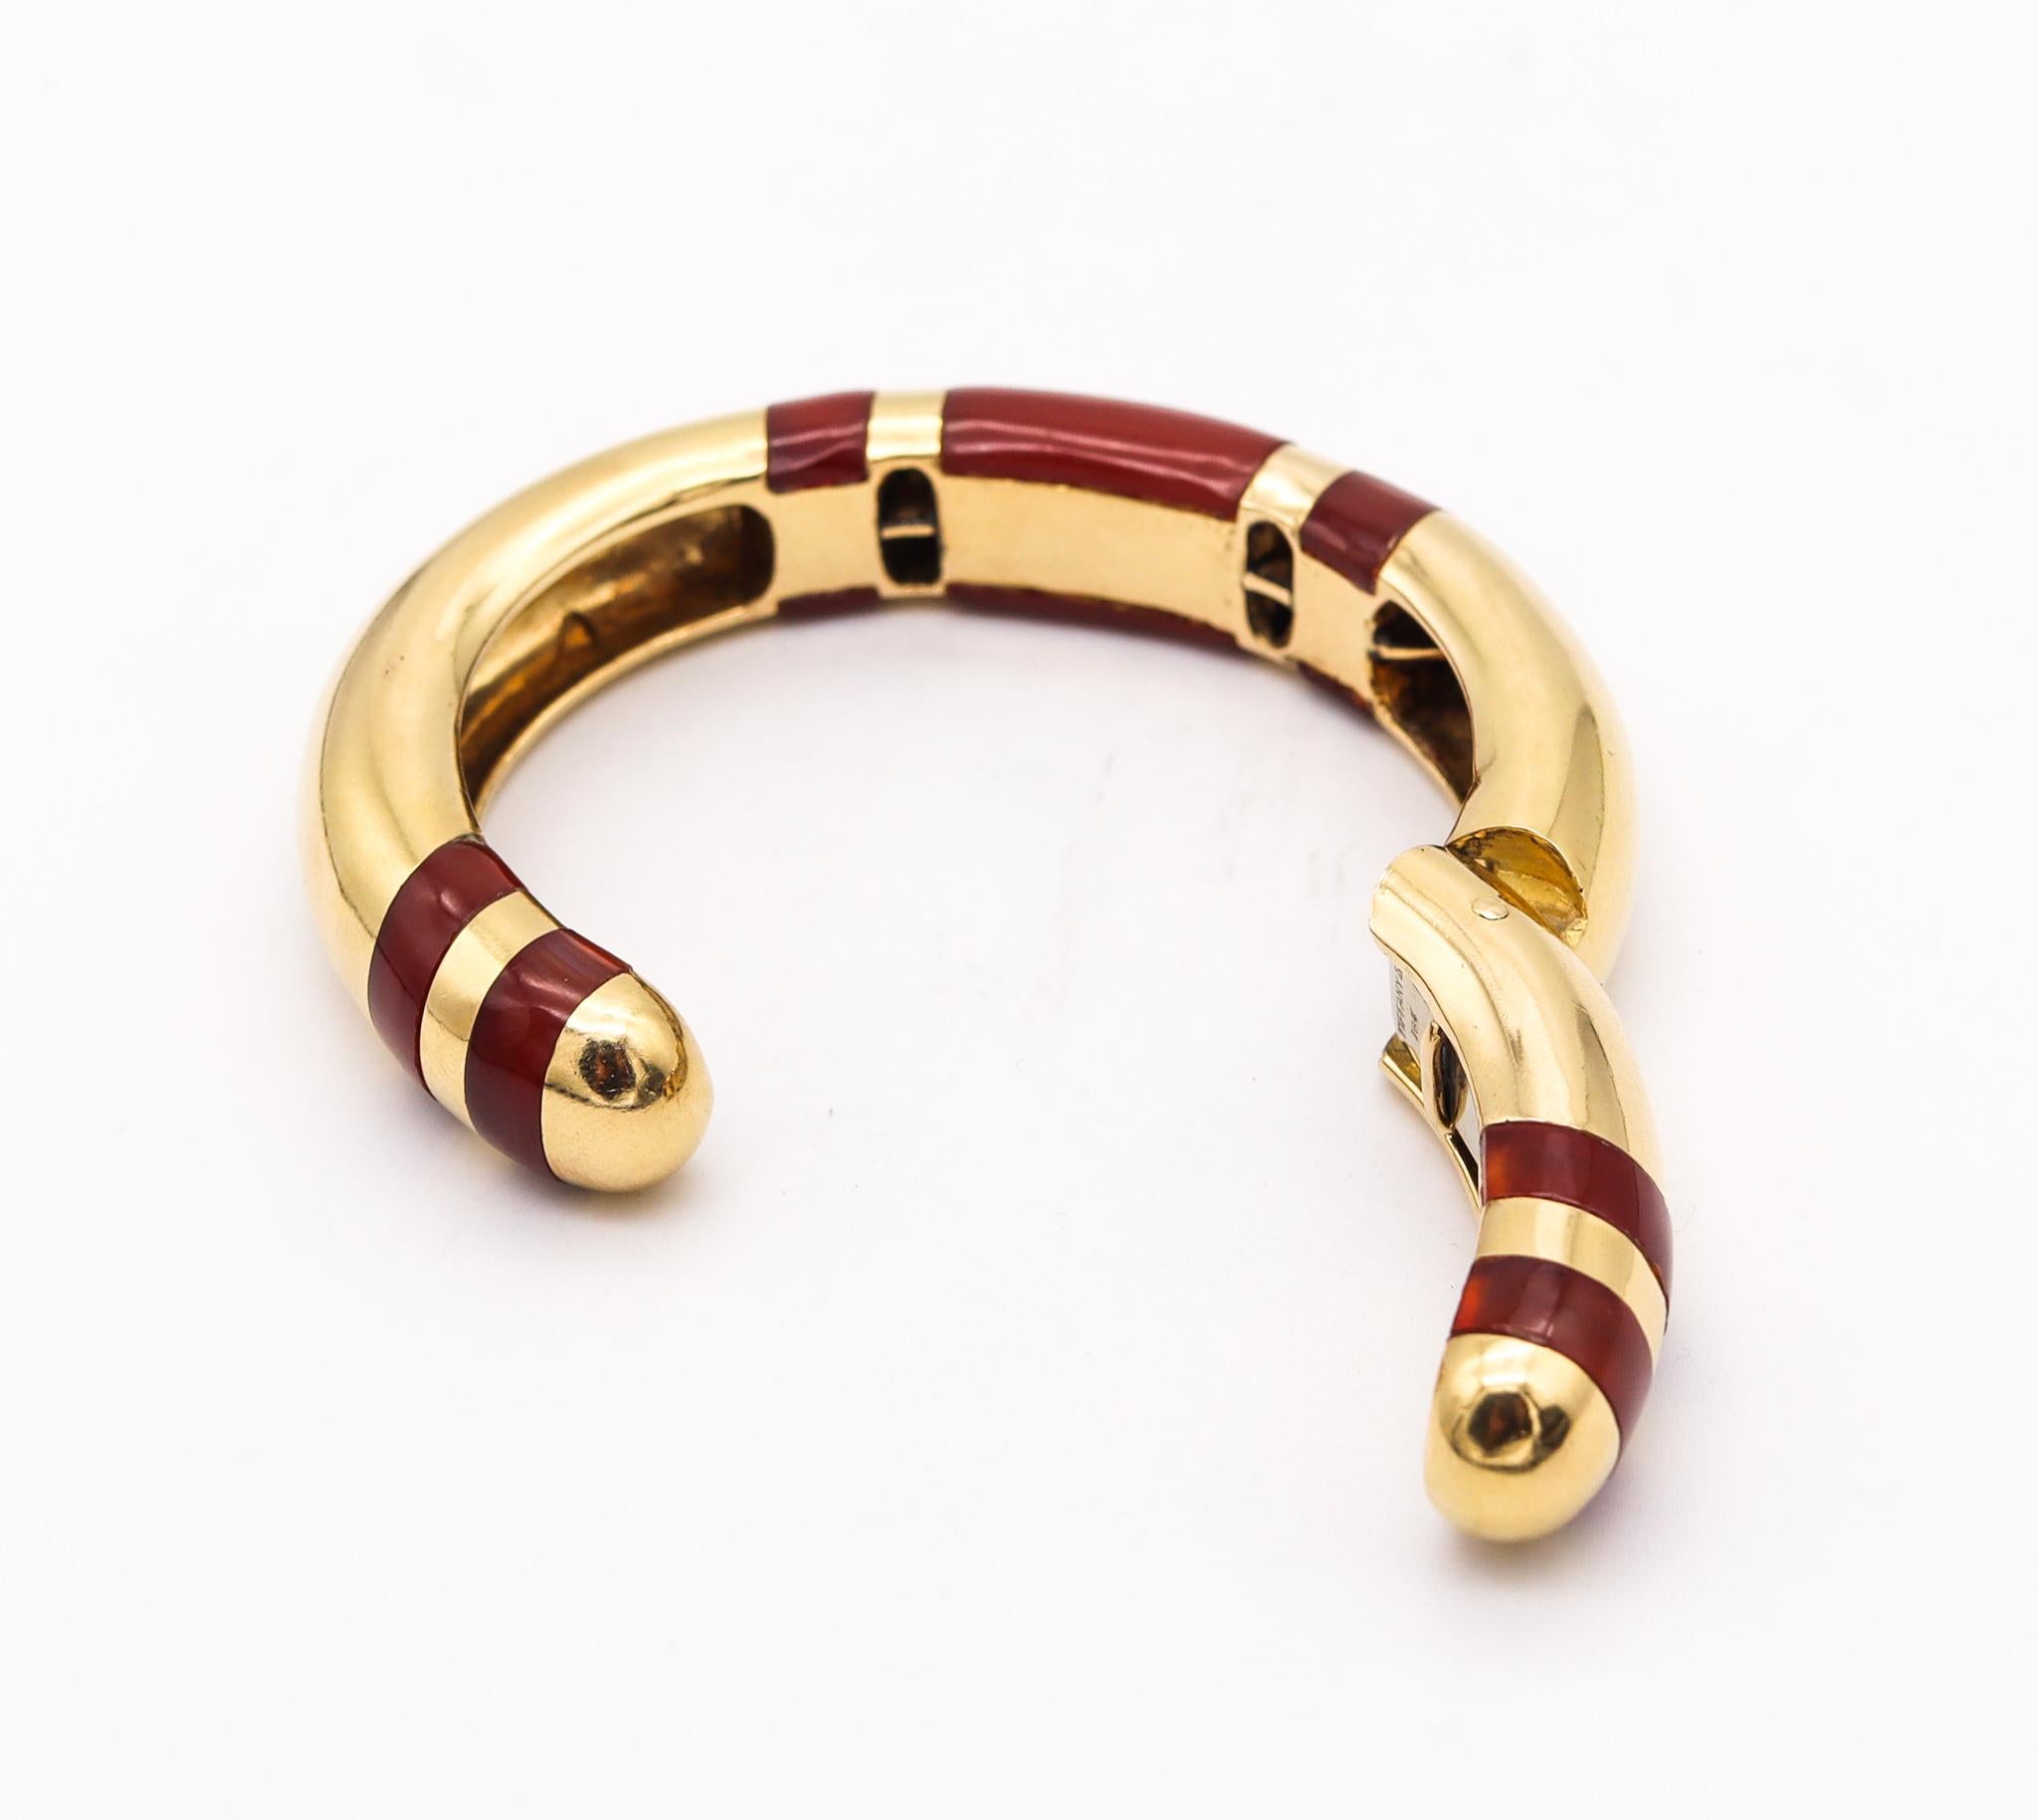 Cabochon Tiffany & Co 1973 Sonia Younis Bracelet Cuff in 18kt Yellow Gold with Carnelian